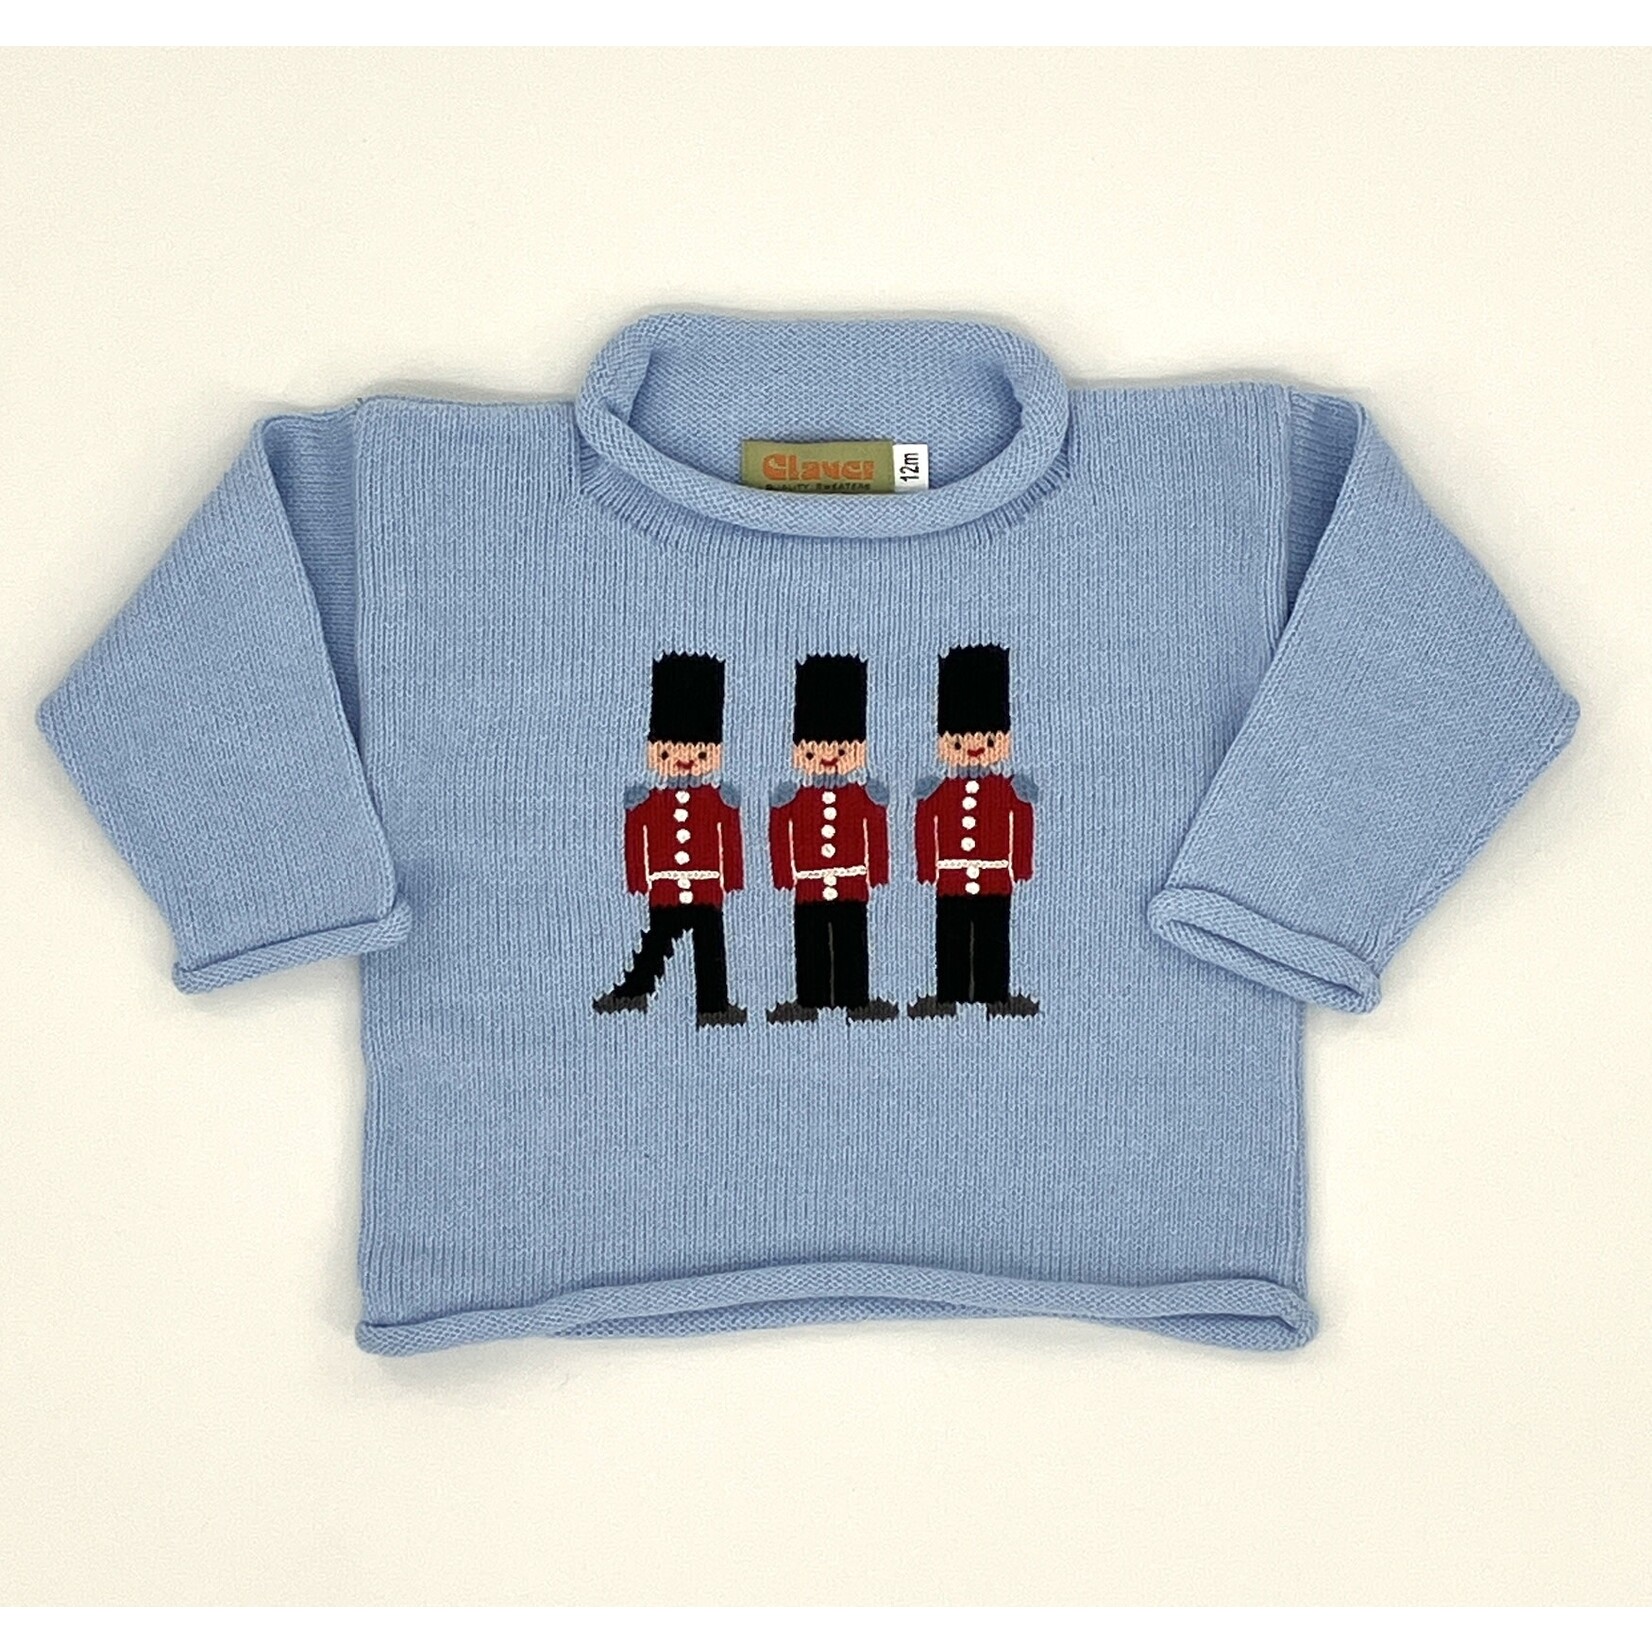 ACVISA/CLAVER Toy Soldiers Sweater